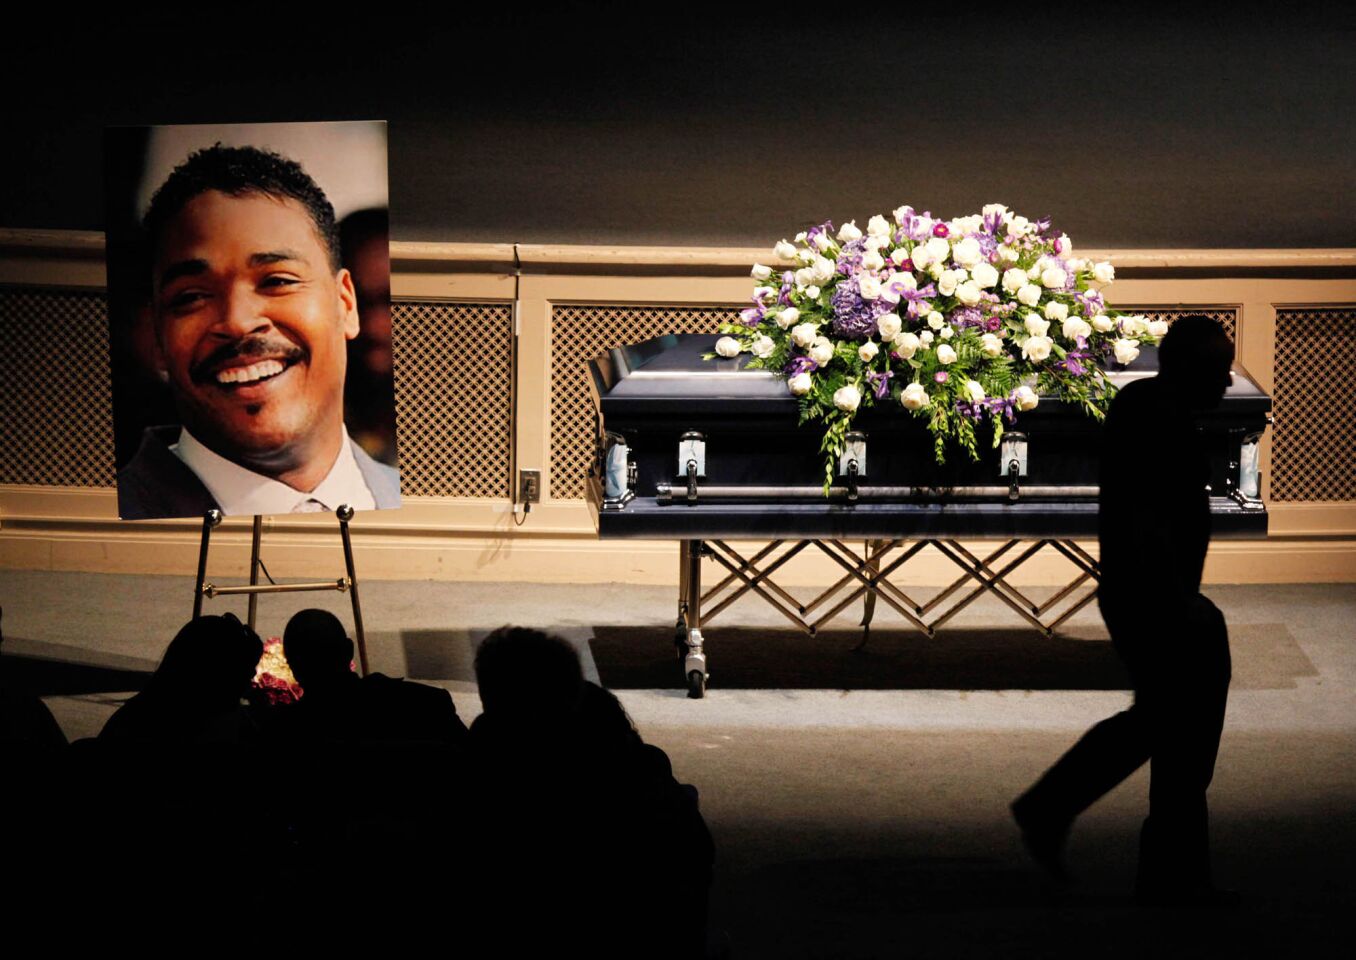 A memorial service for Rodney King, whose videotaped beating by Los Angeles police officers led to the worst urban riots in a generation and spawned widespread reforms, at Forest Lawn Hollywood Hills cemetery on June 30, 2012, some two weeks after he was found dead in his swimming pool.